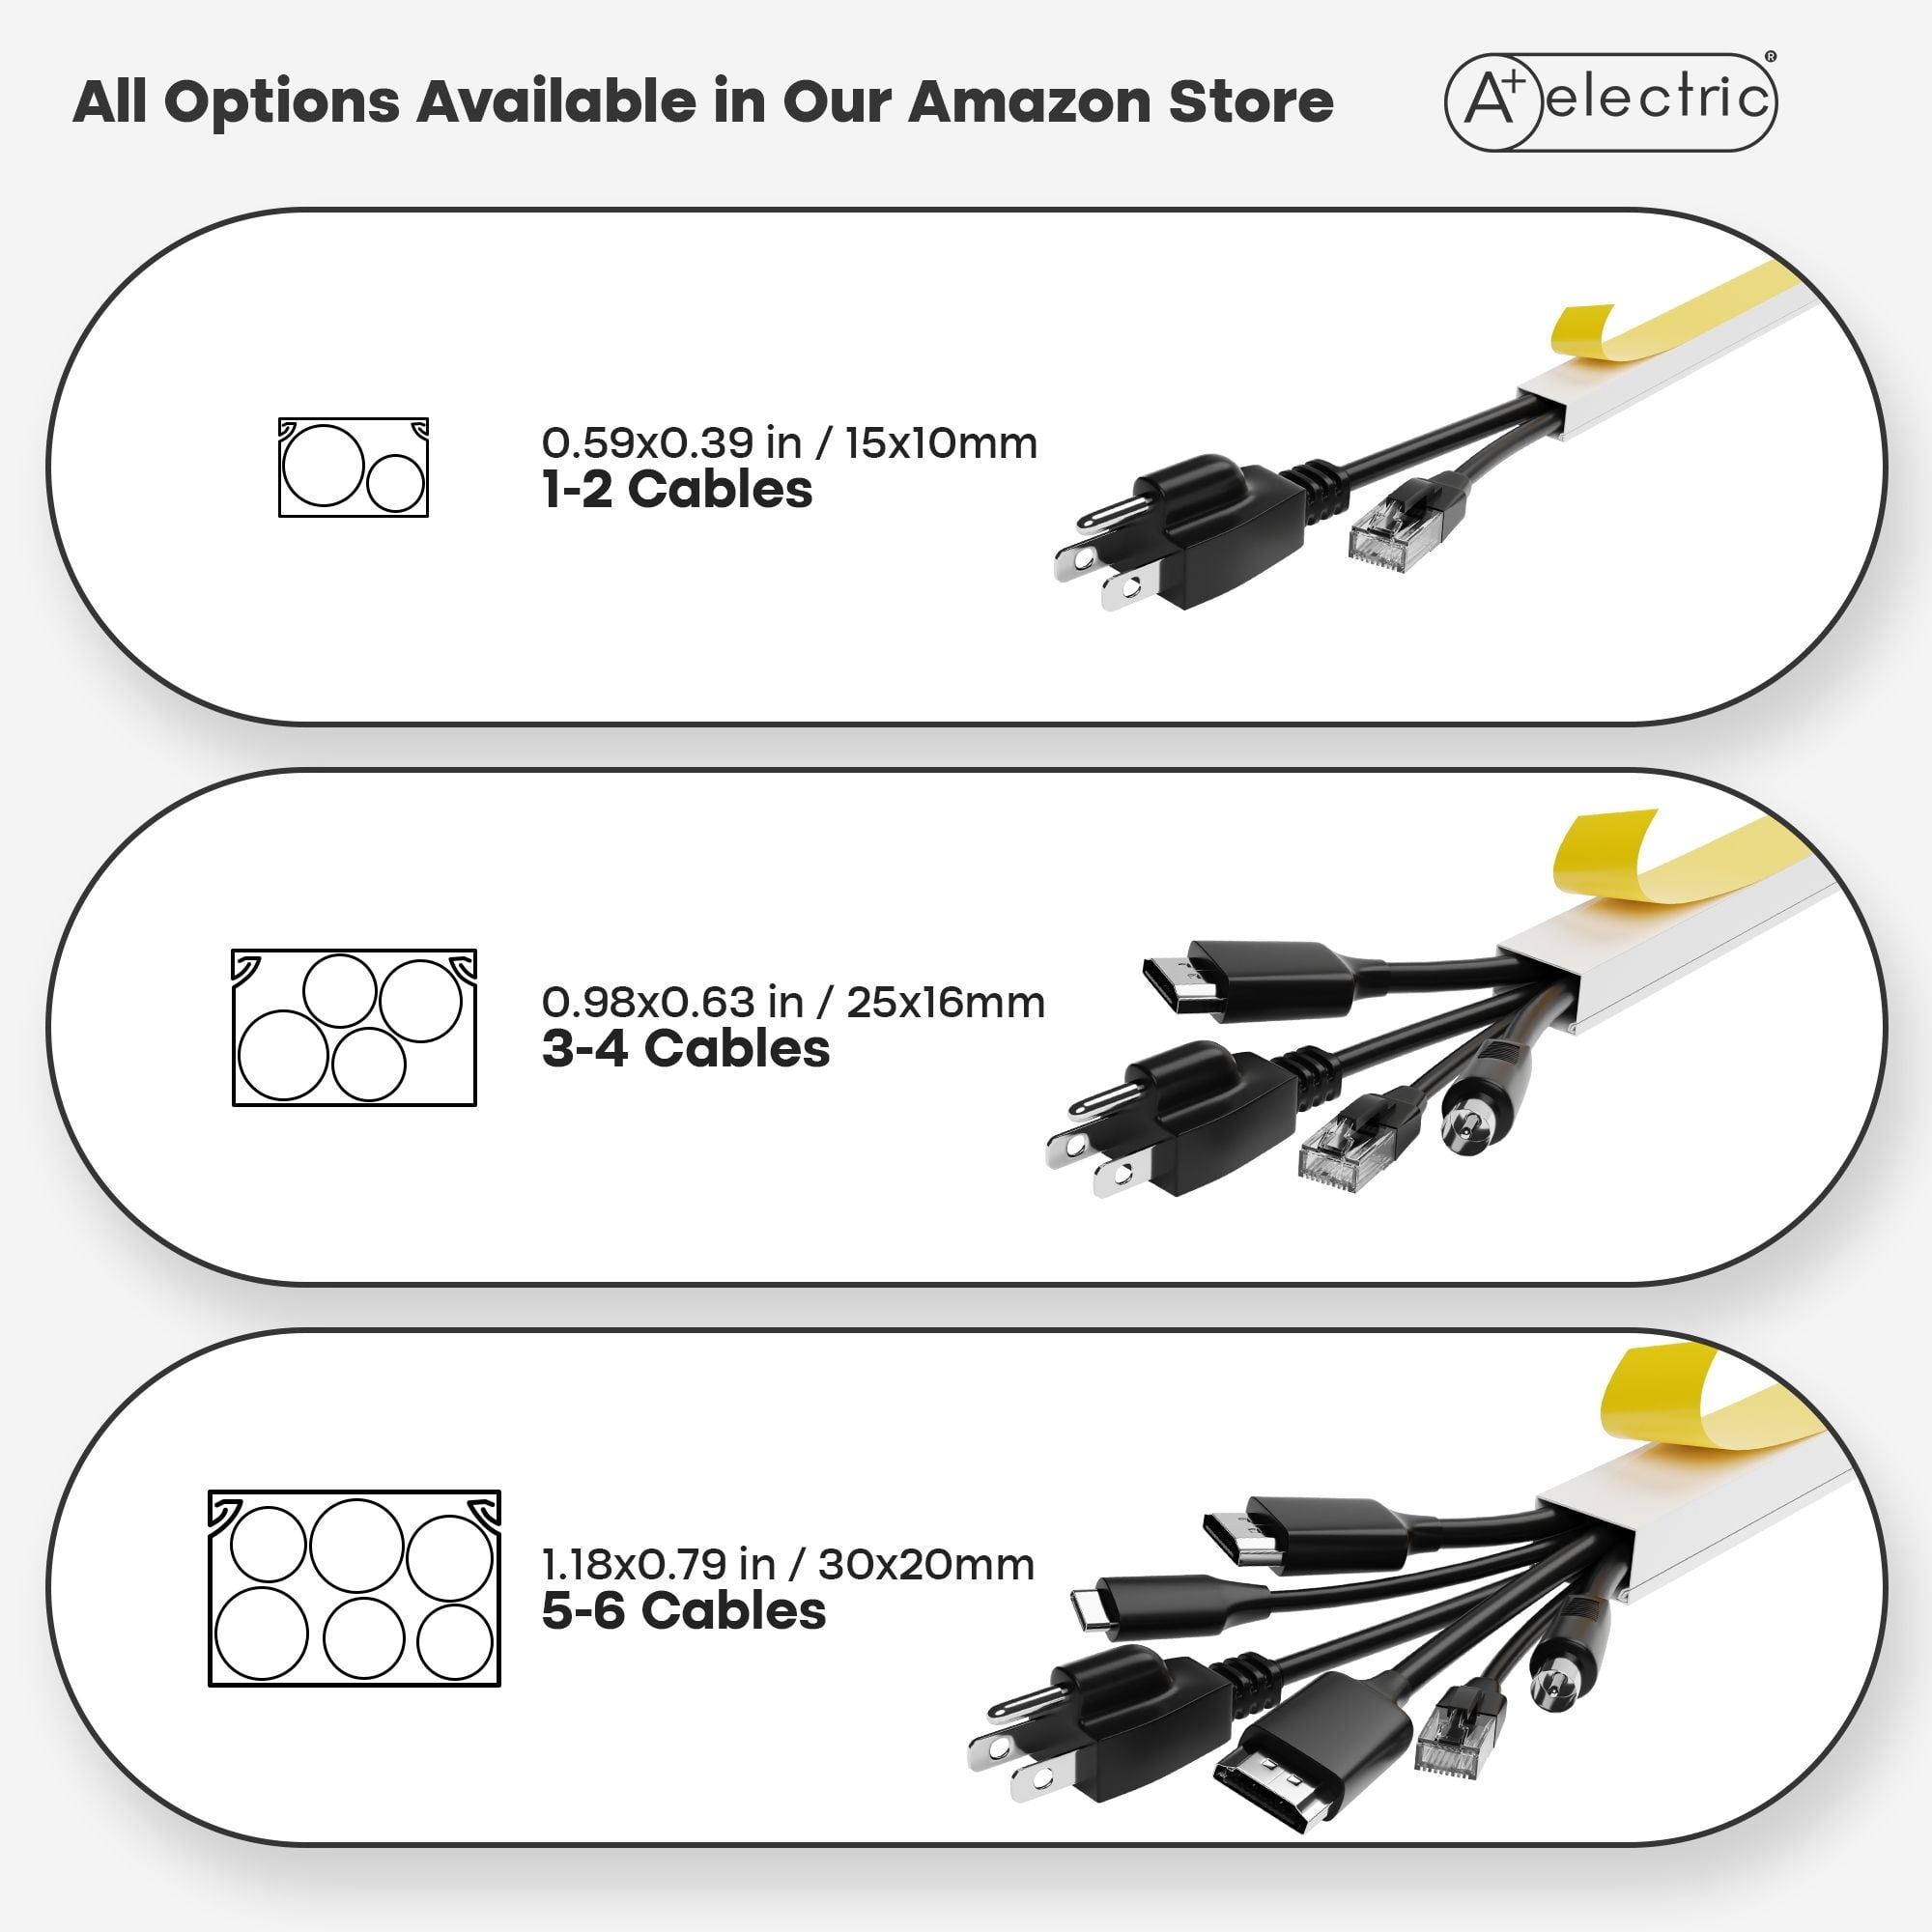 .com: Cord Covers to Baby Proof Cords, Wires, and Cabling